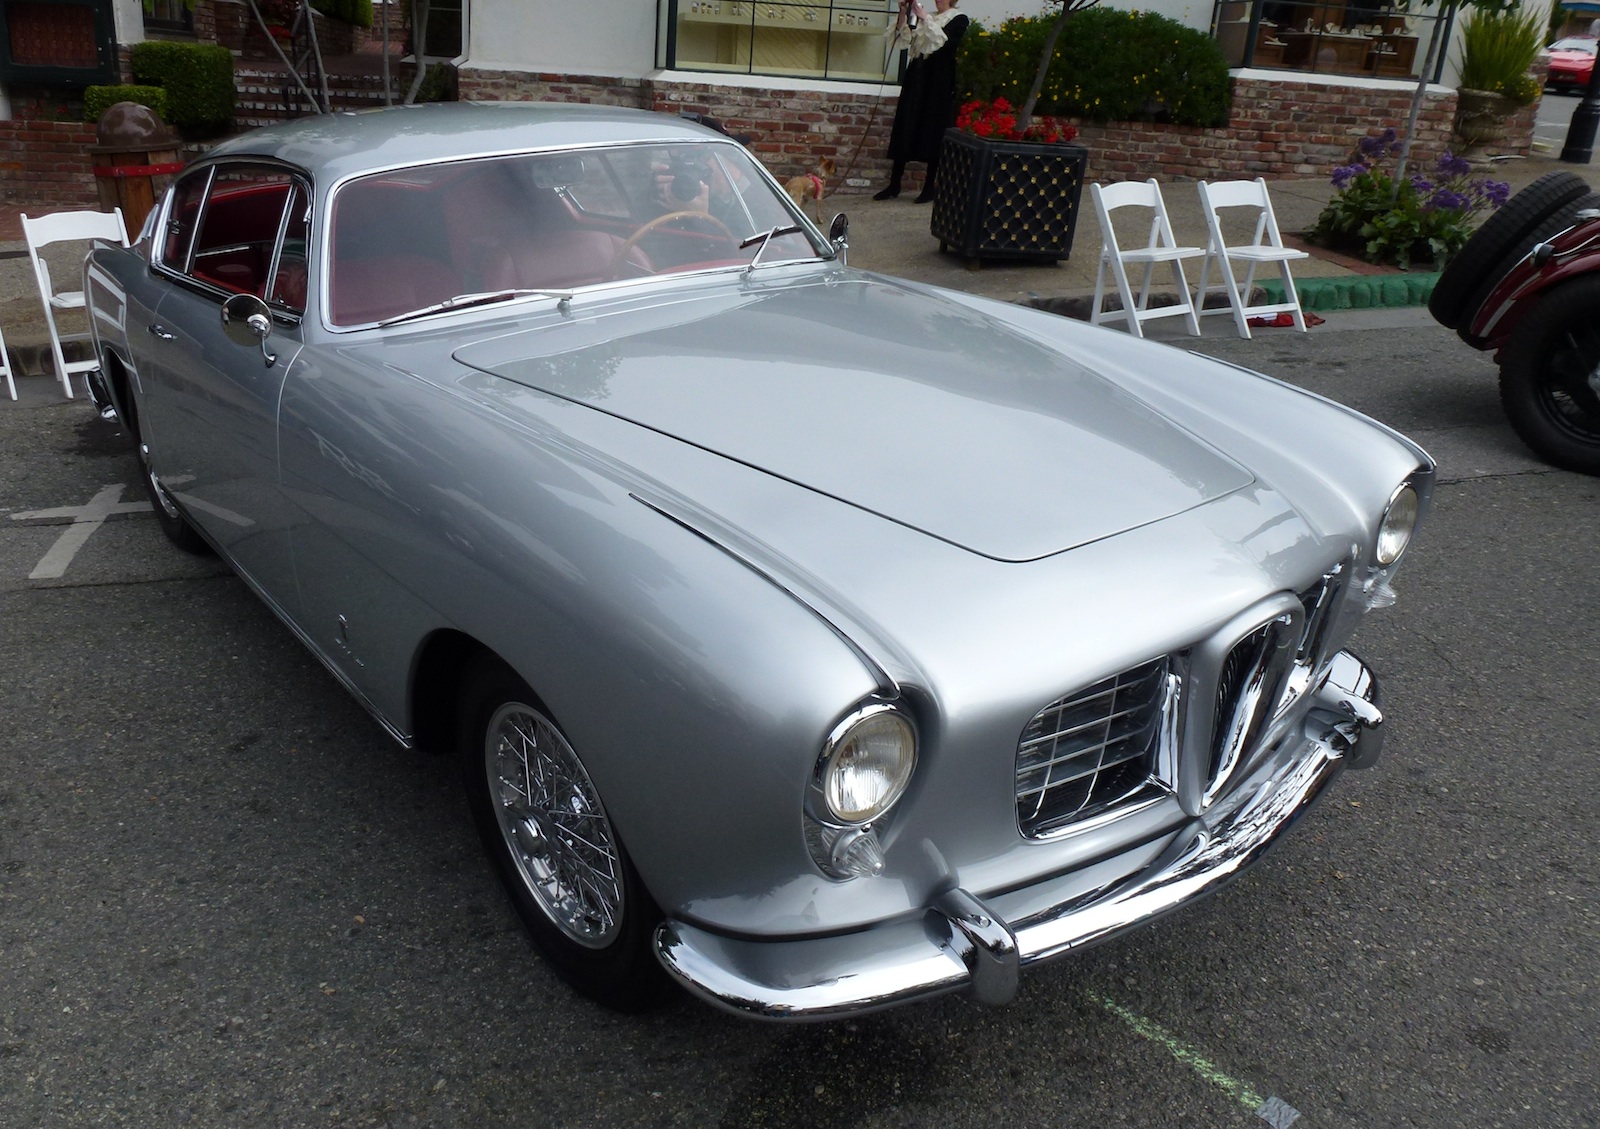 No One Makes Cars Like This Anymore - The 1954 Alfa Romeo 1900 CSS By Ghia